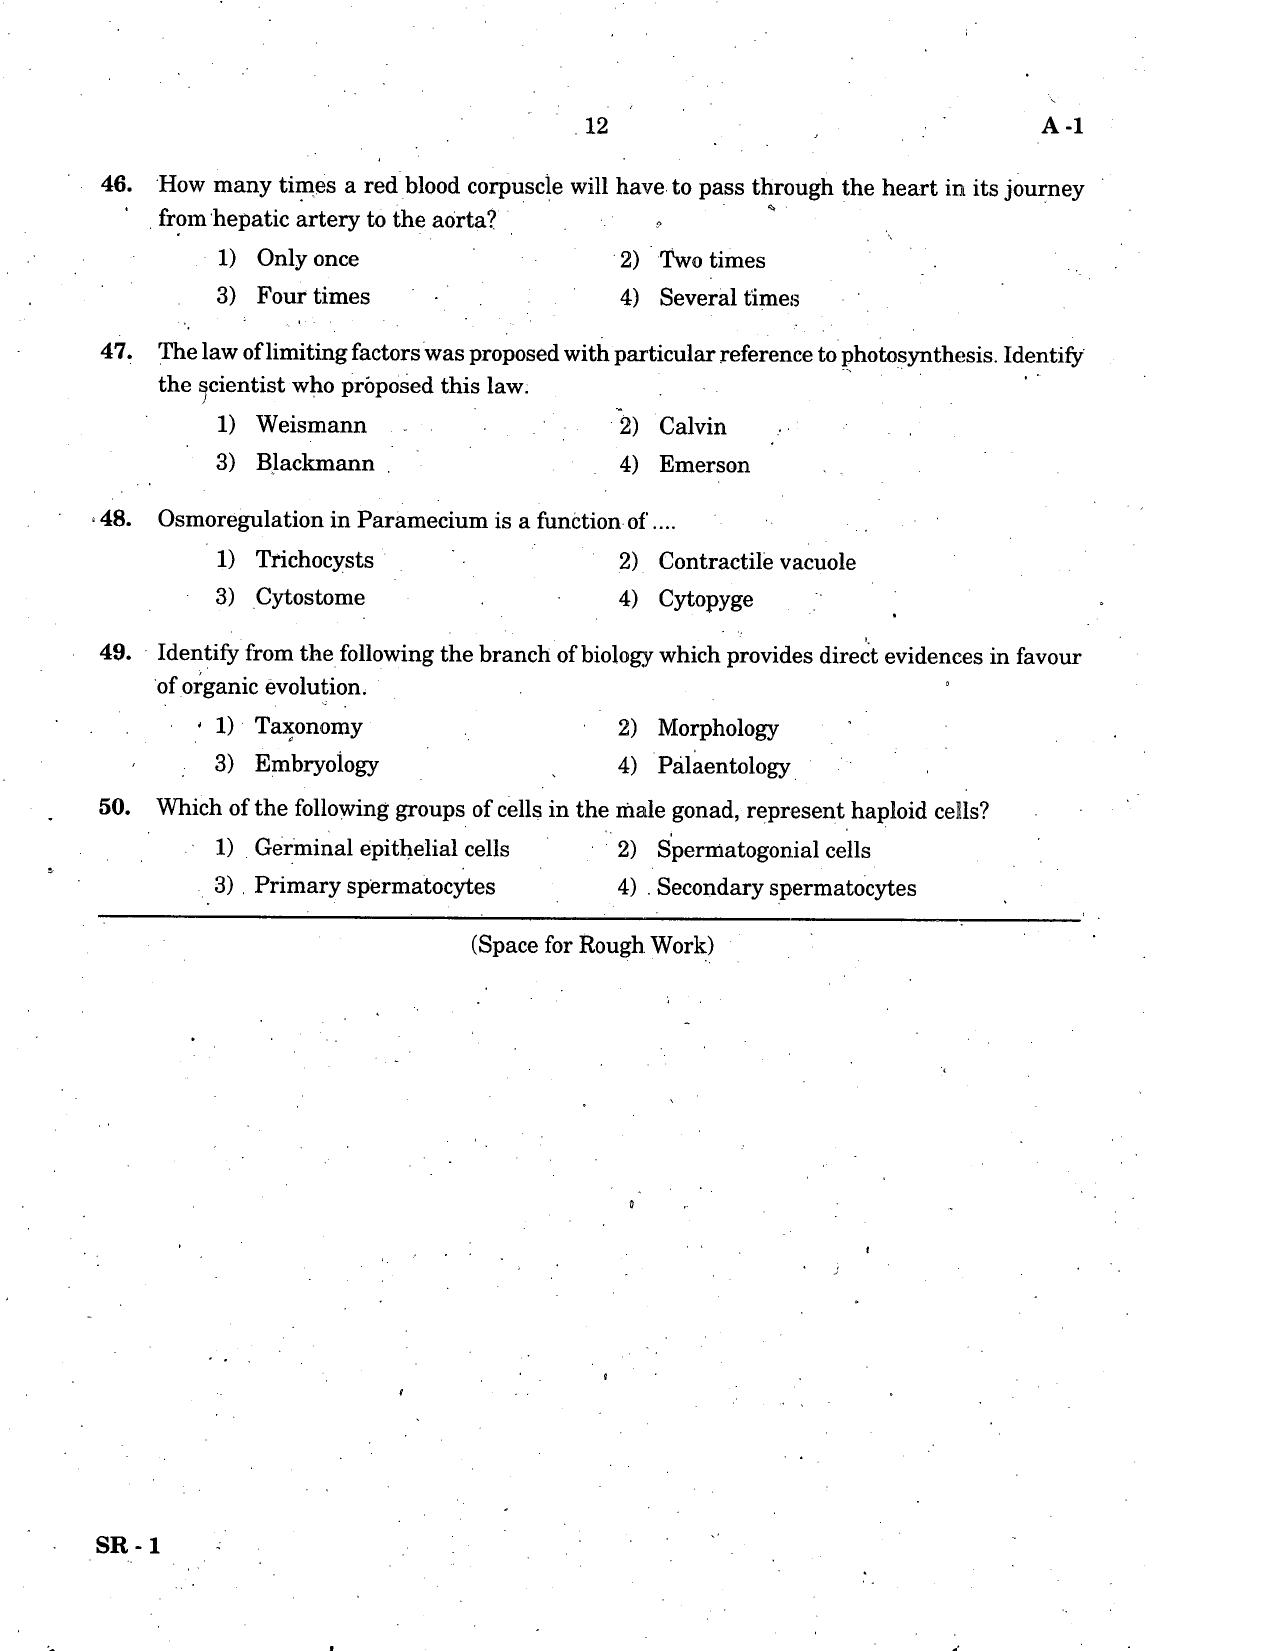 KCET Biology 2005 Question Papers - Page 12